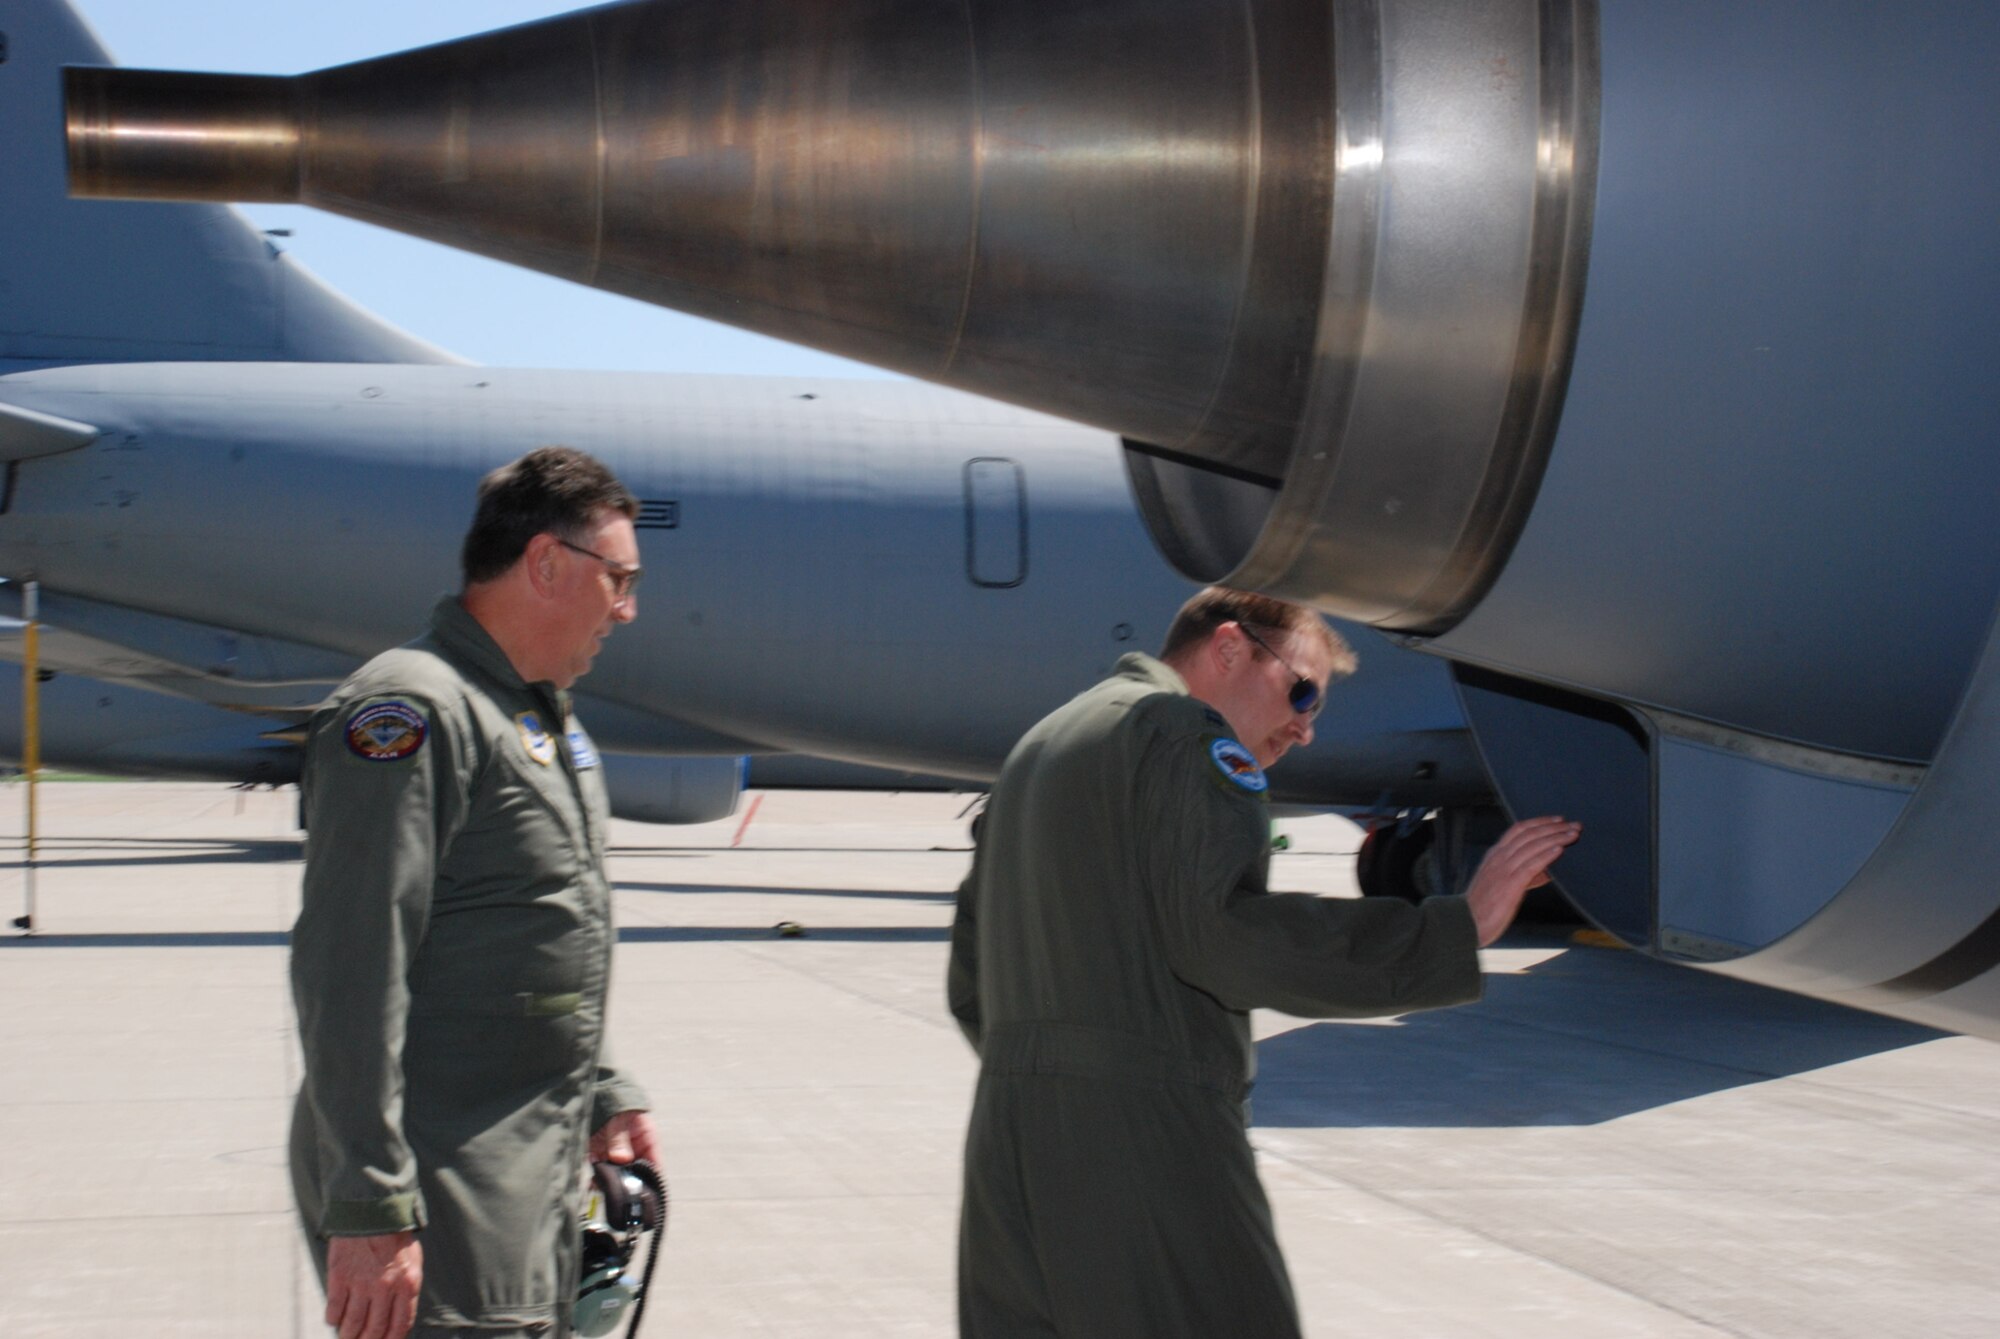 Capt. Jason Thomas, 107th Airlift Wing, Pilot, looks over a KC-135 as part of a preflight inspection here before the aircraft flies her last refueling mission with the 107th on April 22.  Also in the photo, Master Sgt. Stephan Kovacs, 107th AW, helps perform a preflight inspection on his aircraft. The aircraft will soon leave Niagara Falls for the 126 ARW, Scott AFB, Illinois Air National Guard as the 107th converts to C-130H2's.  (U.S. Air Force photo/Staff Sgt. Rebecca Kenyon).